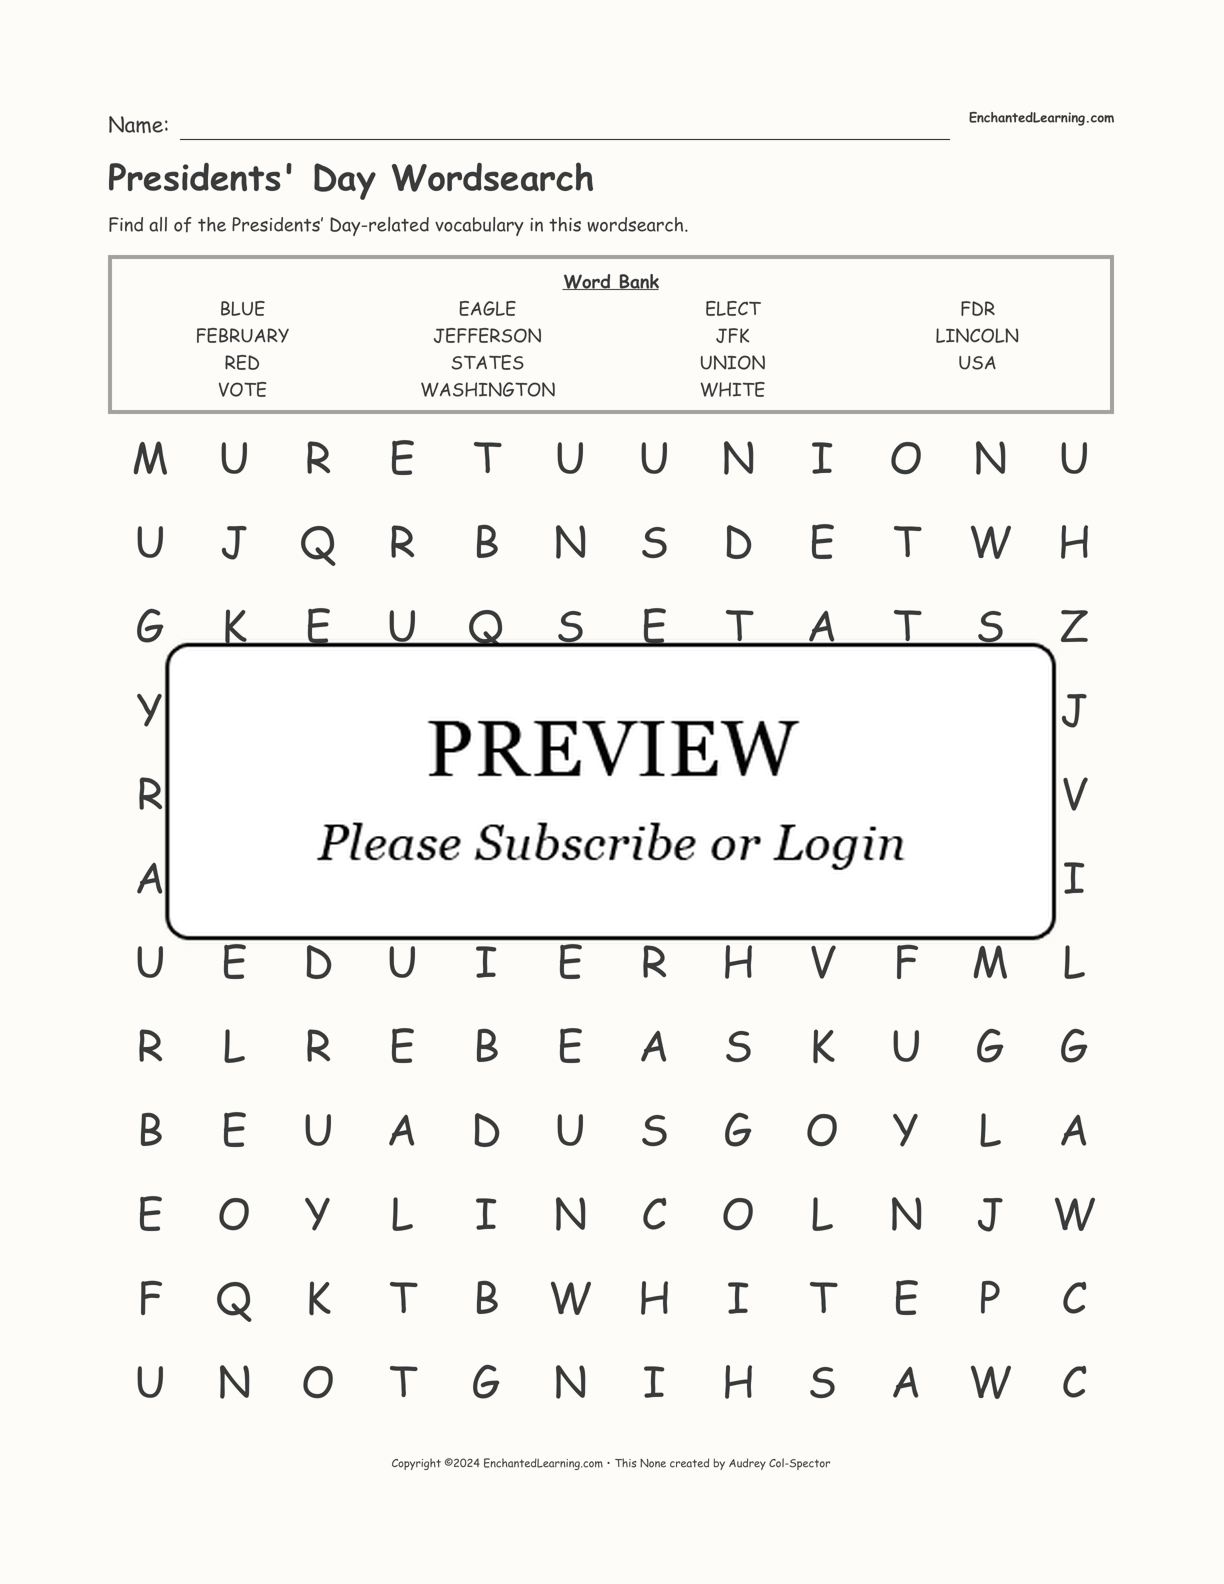 Presidents' Day Wordsearch interactive worksheet page 1